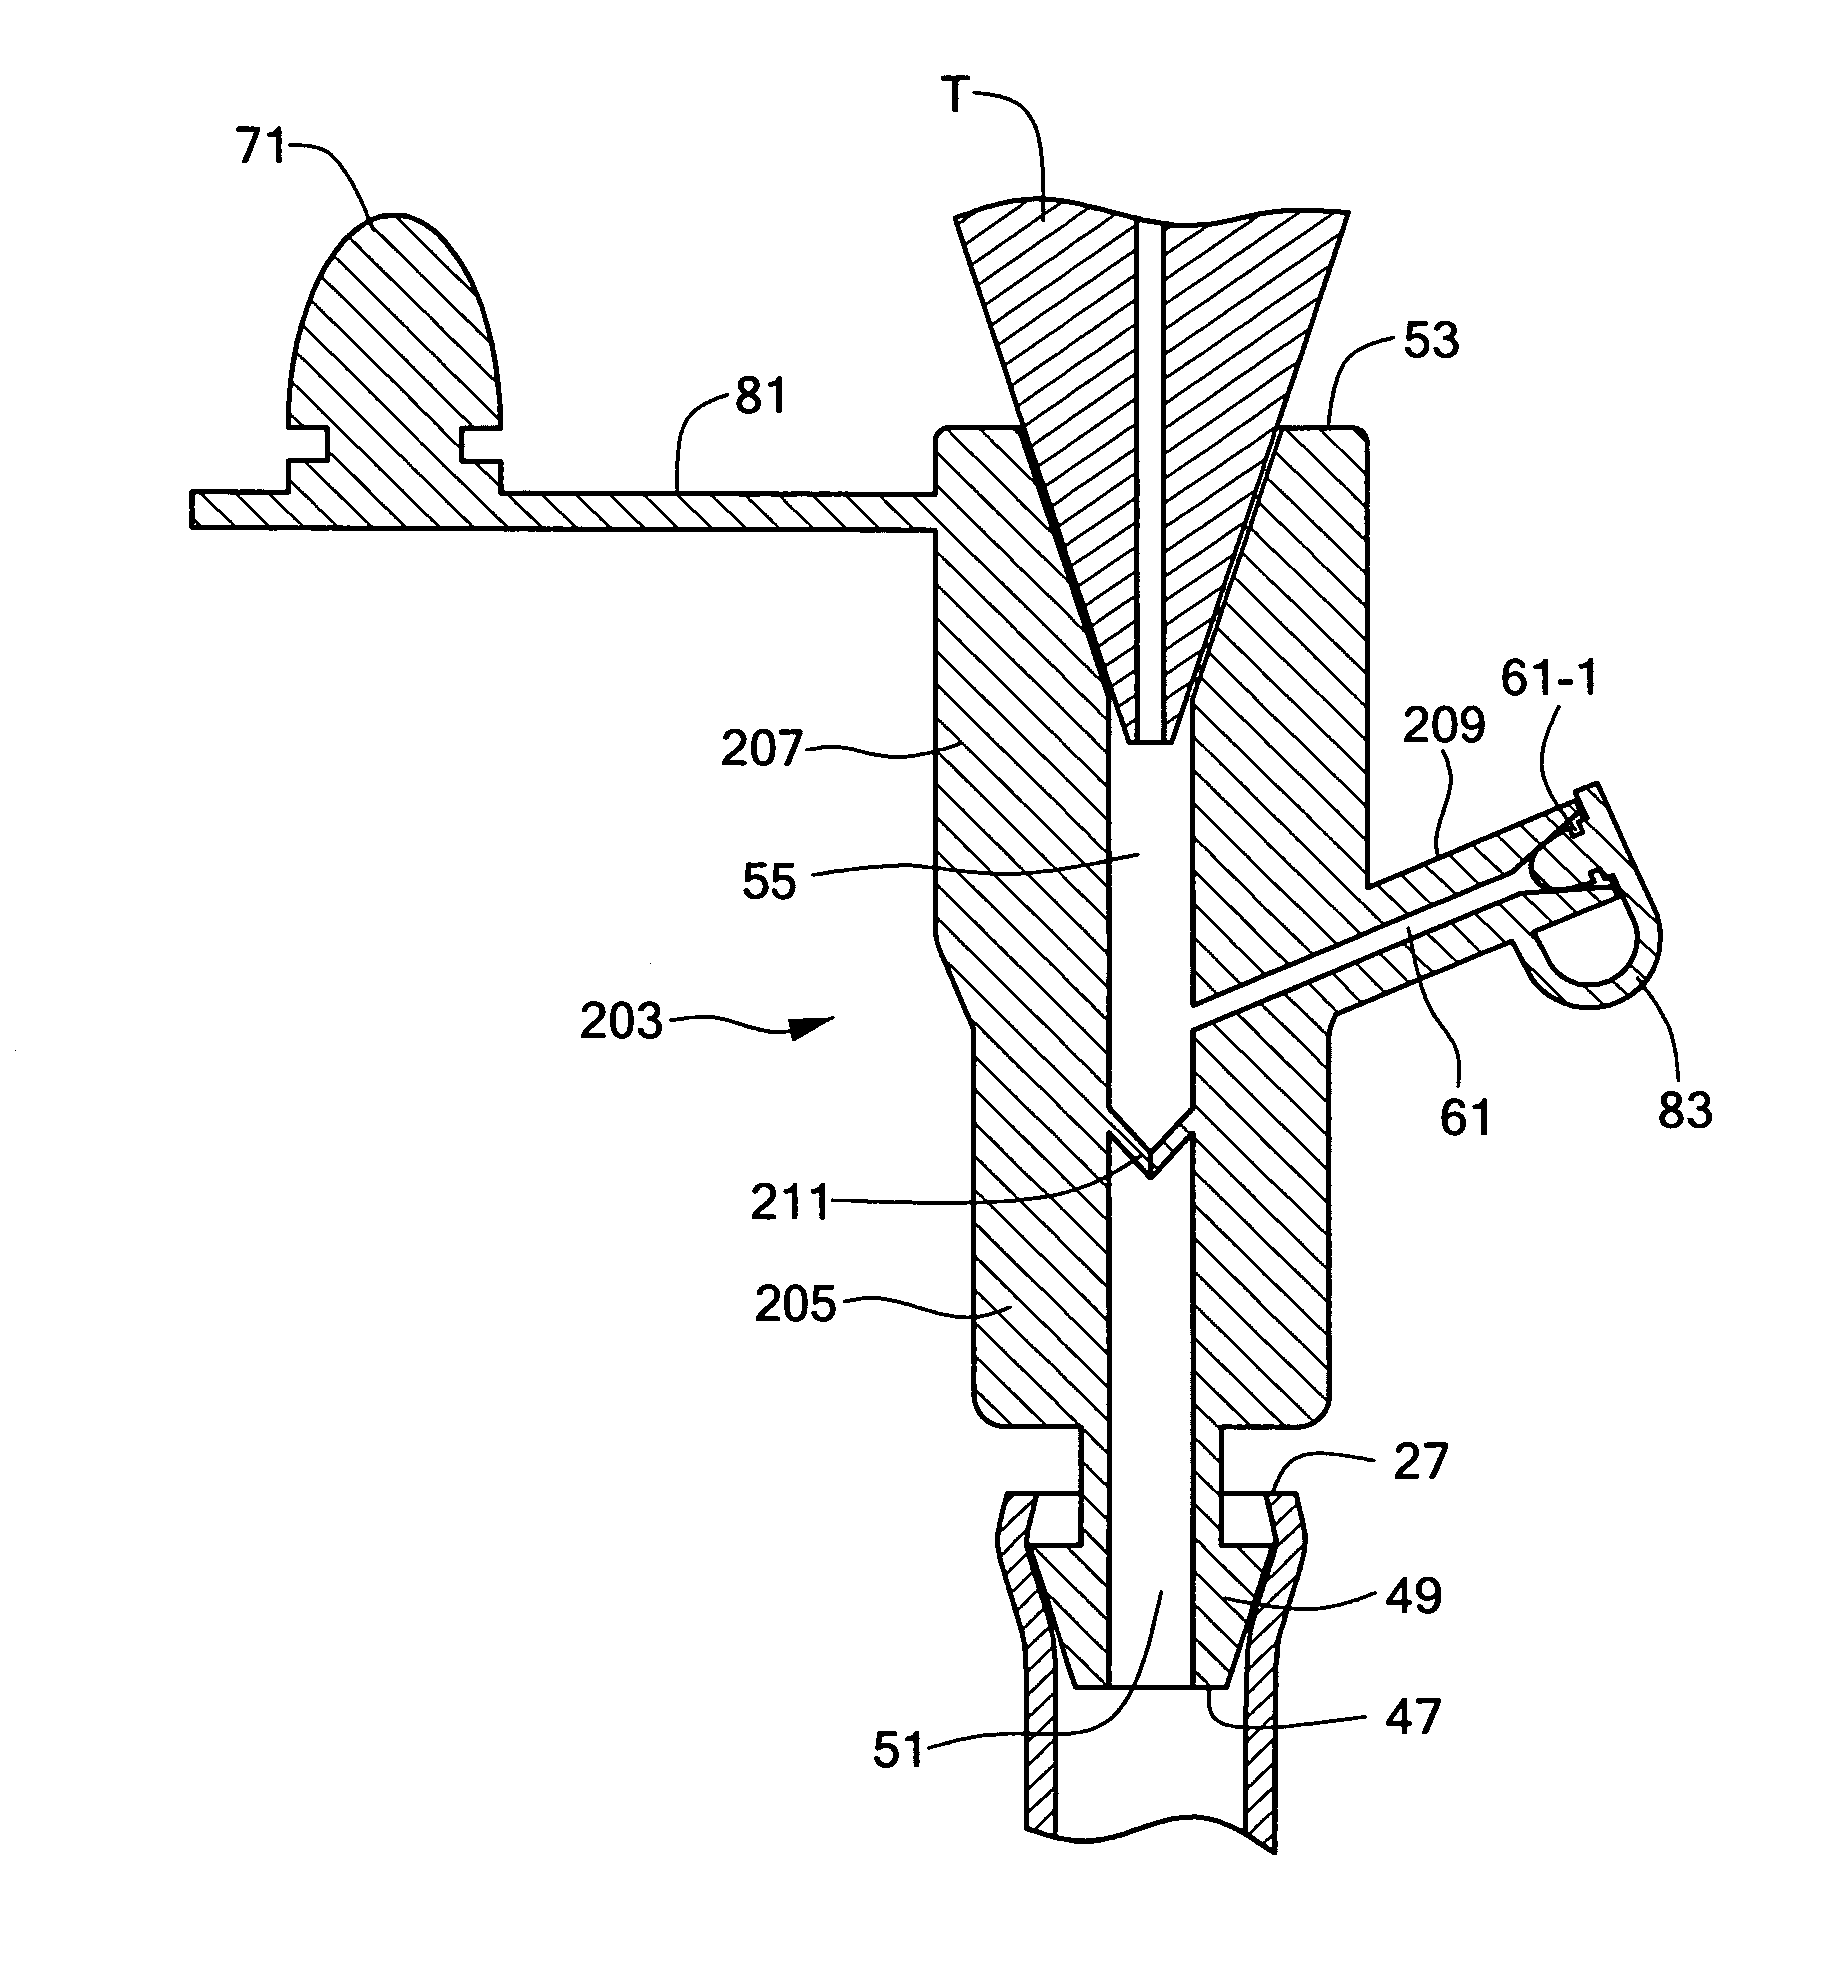 Safety Y-port adaptor and medical catheter assembly including the same